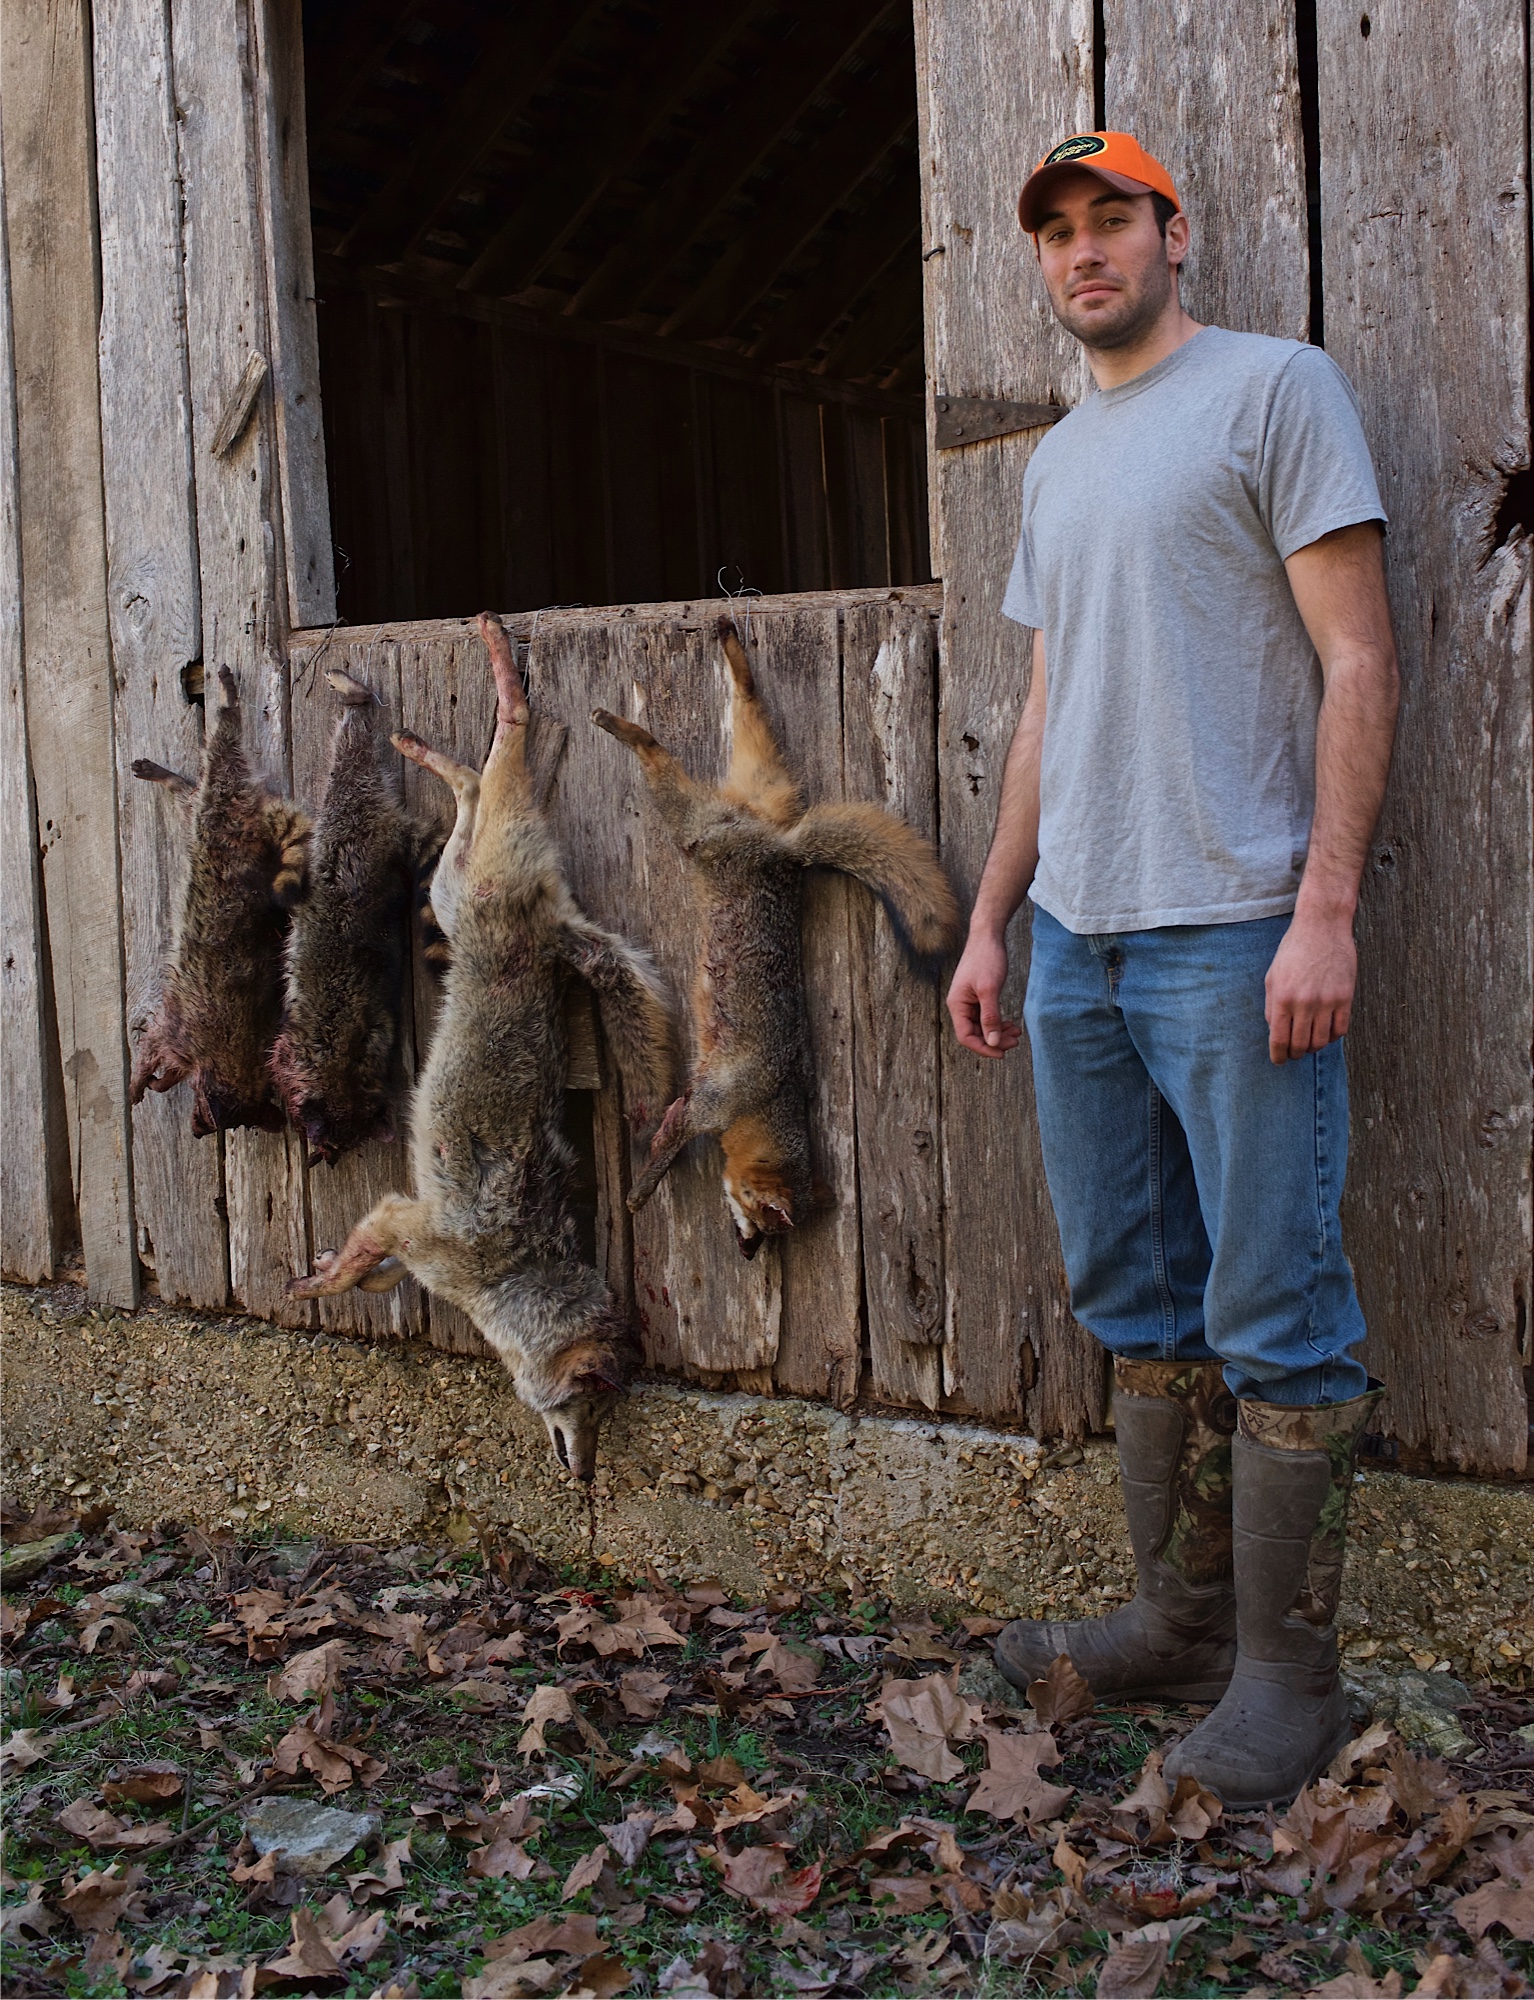 Daniel’s trap line results were two raccoons, a coyote, and a fox.